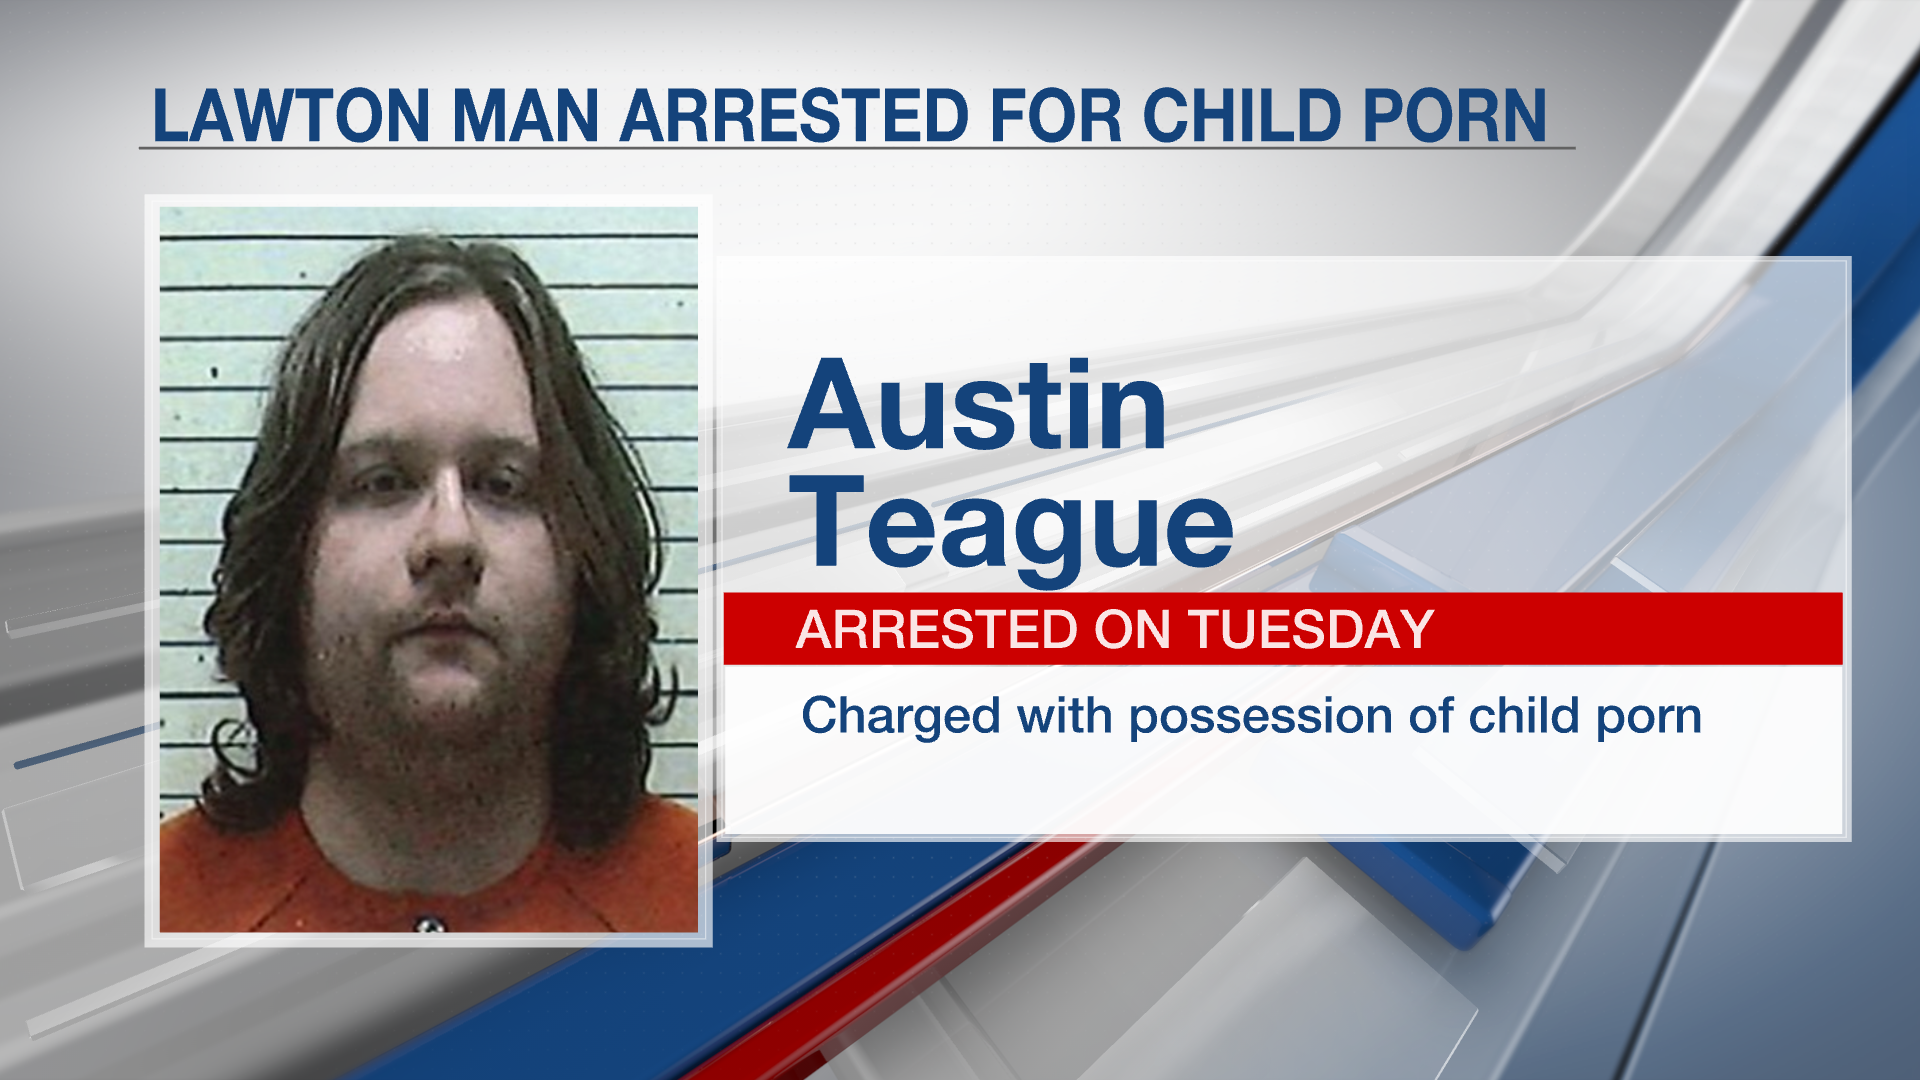 Arrested - Lawton man arrested, charged with child porn possession